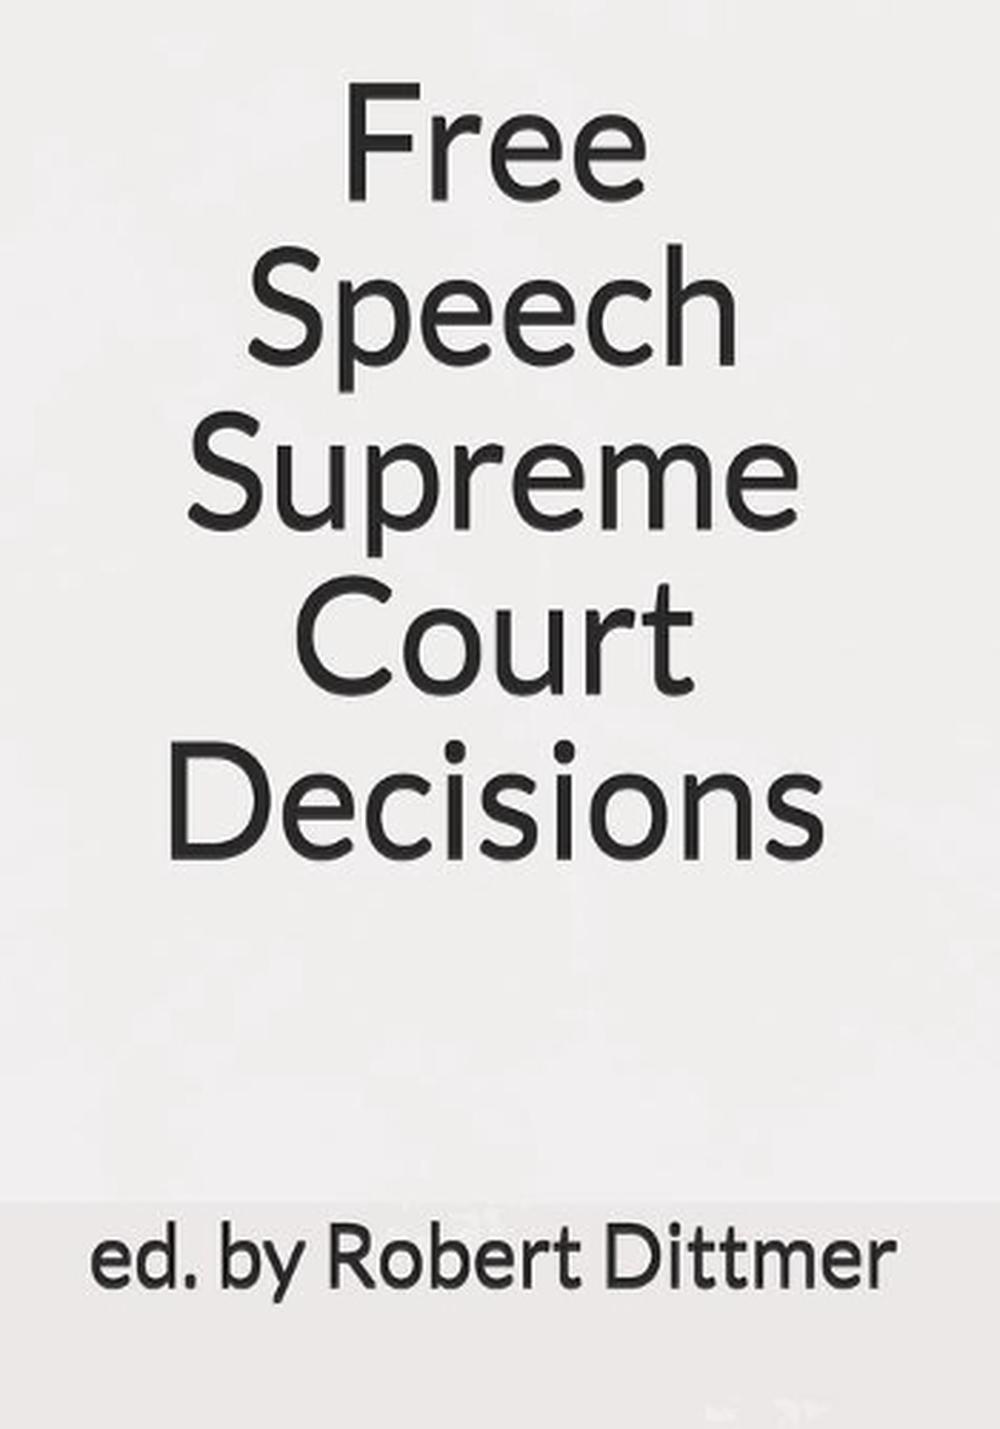 Free Speech Supreme Court Decisions by Robert Dittmer (English